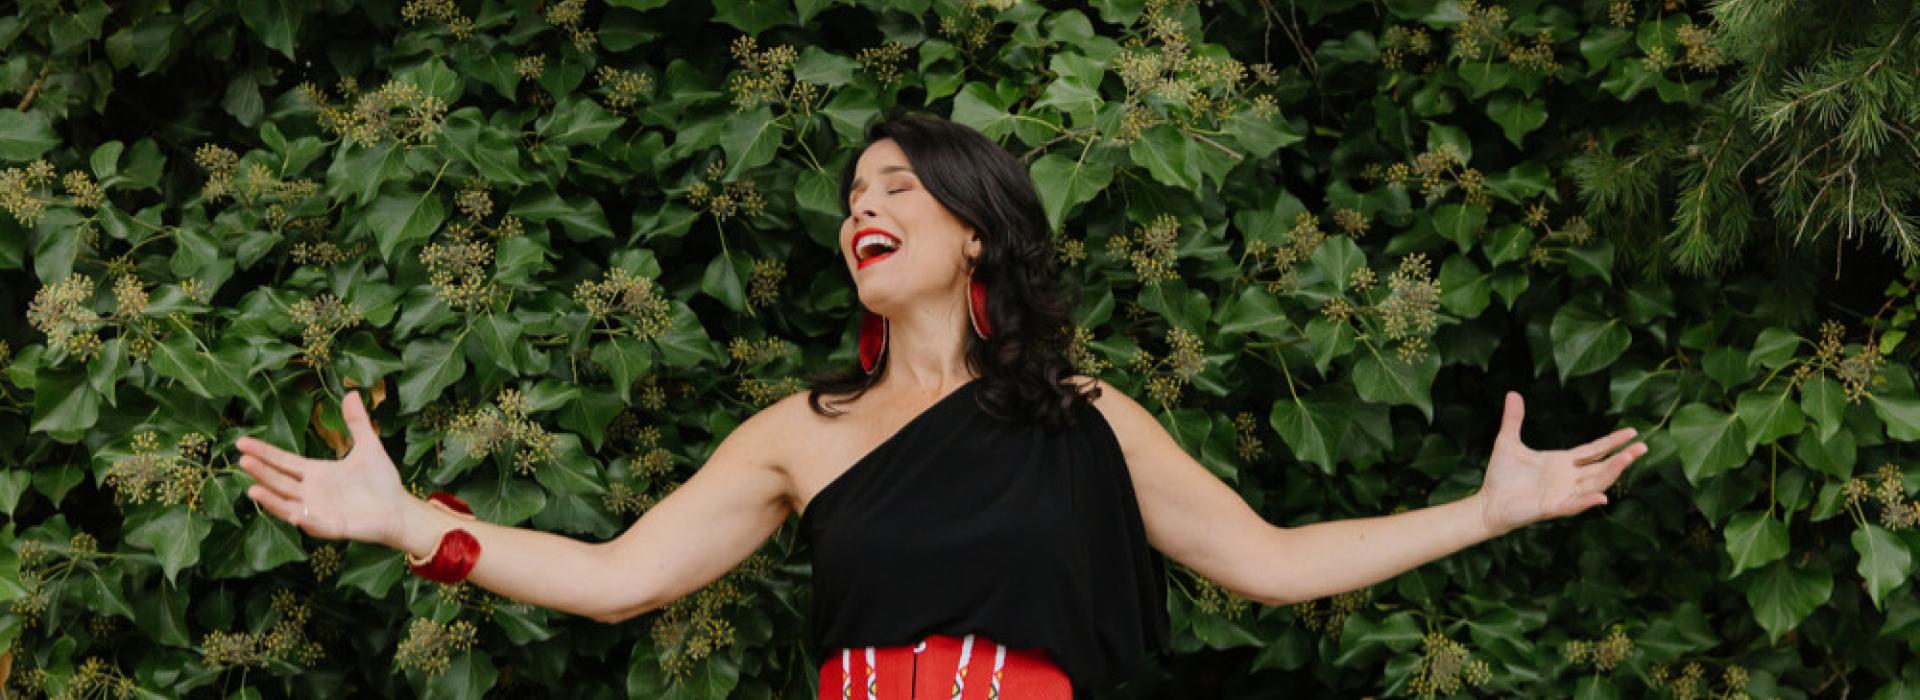 Andrea Menard stands in front of some greenery, wearing a black and red dress with her arms outstretched.